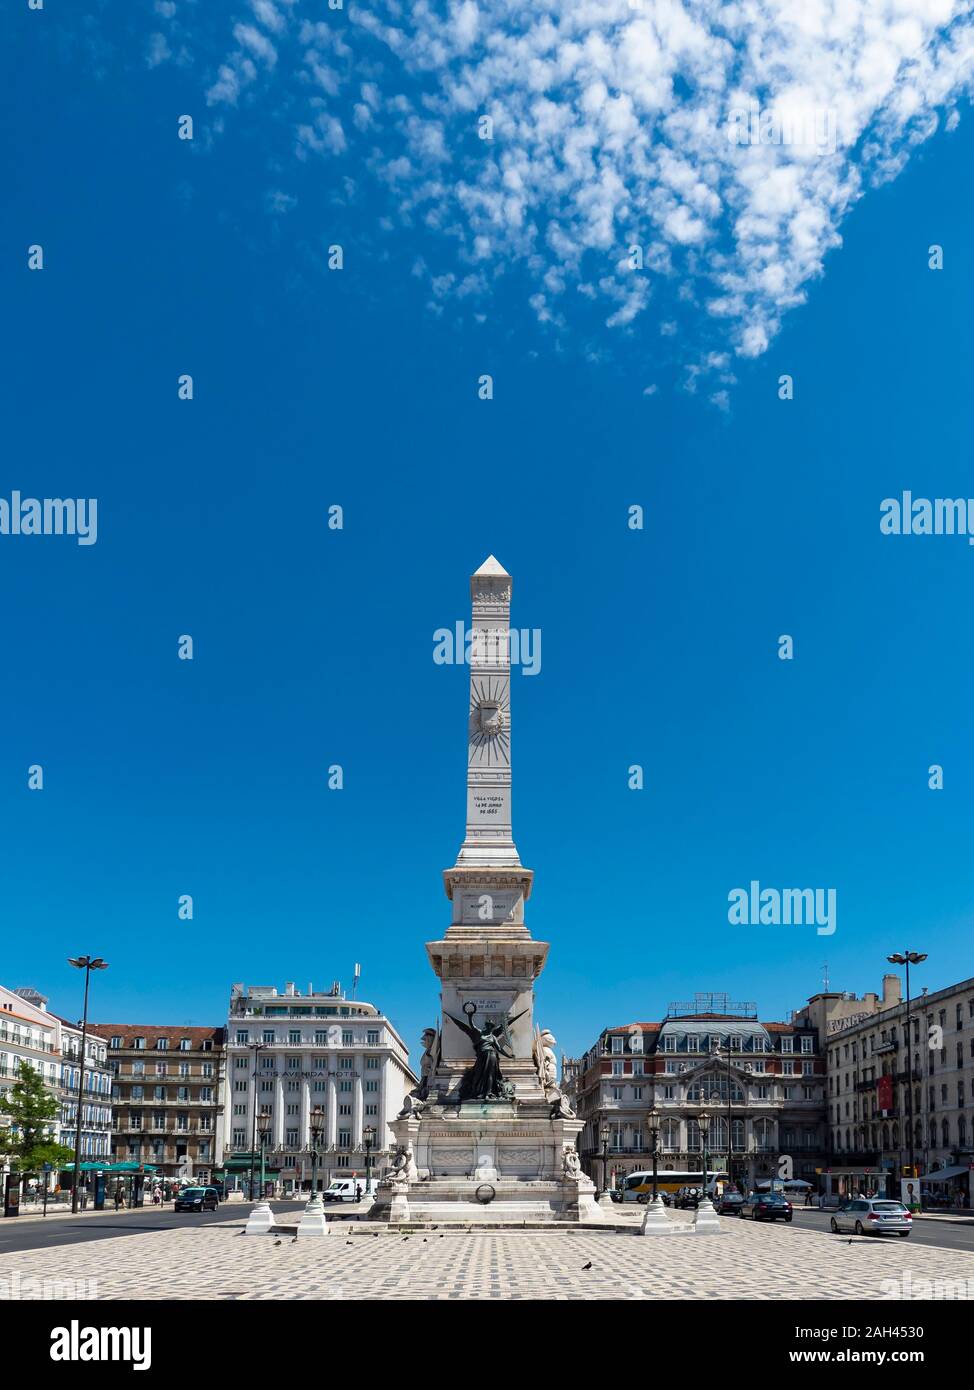 Restauradores Square and the Monument to the Restorers, Lisbon, Portugal Stock Photo